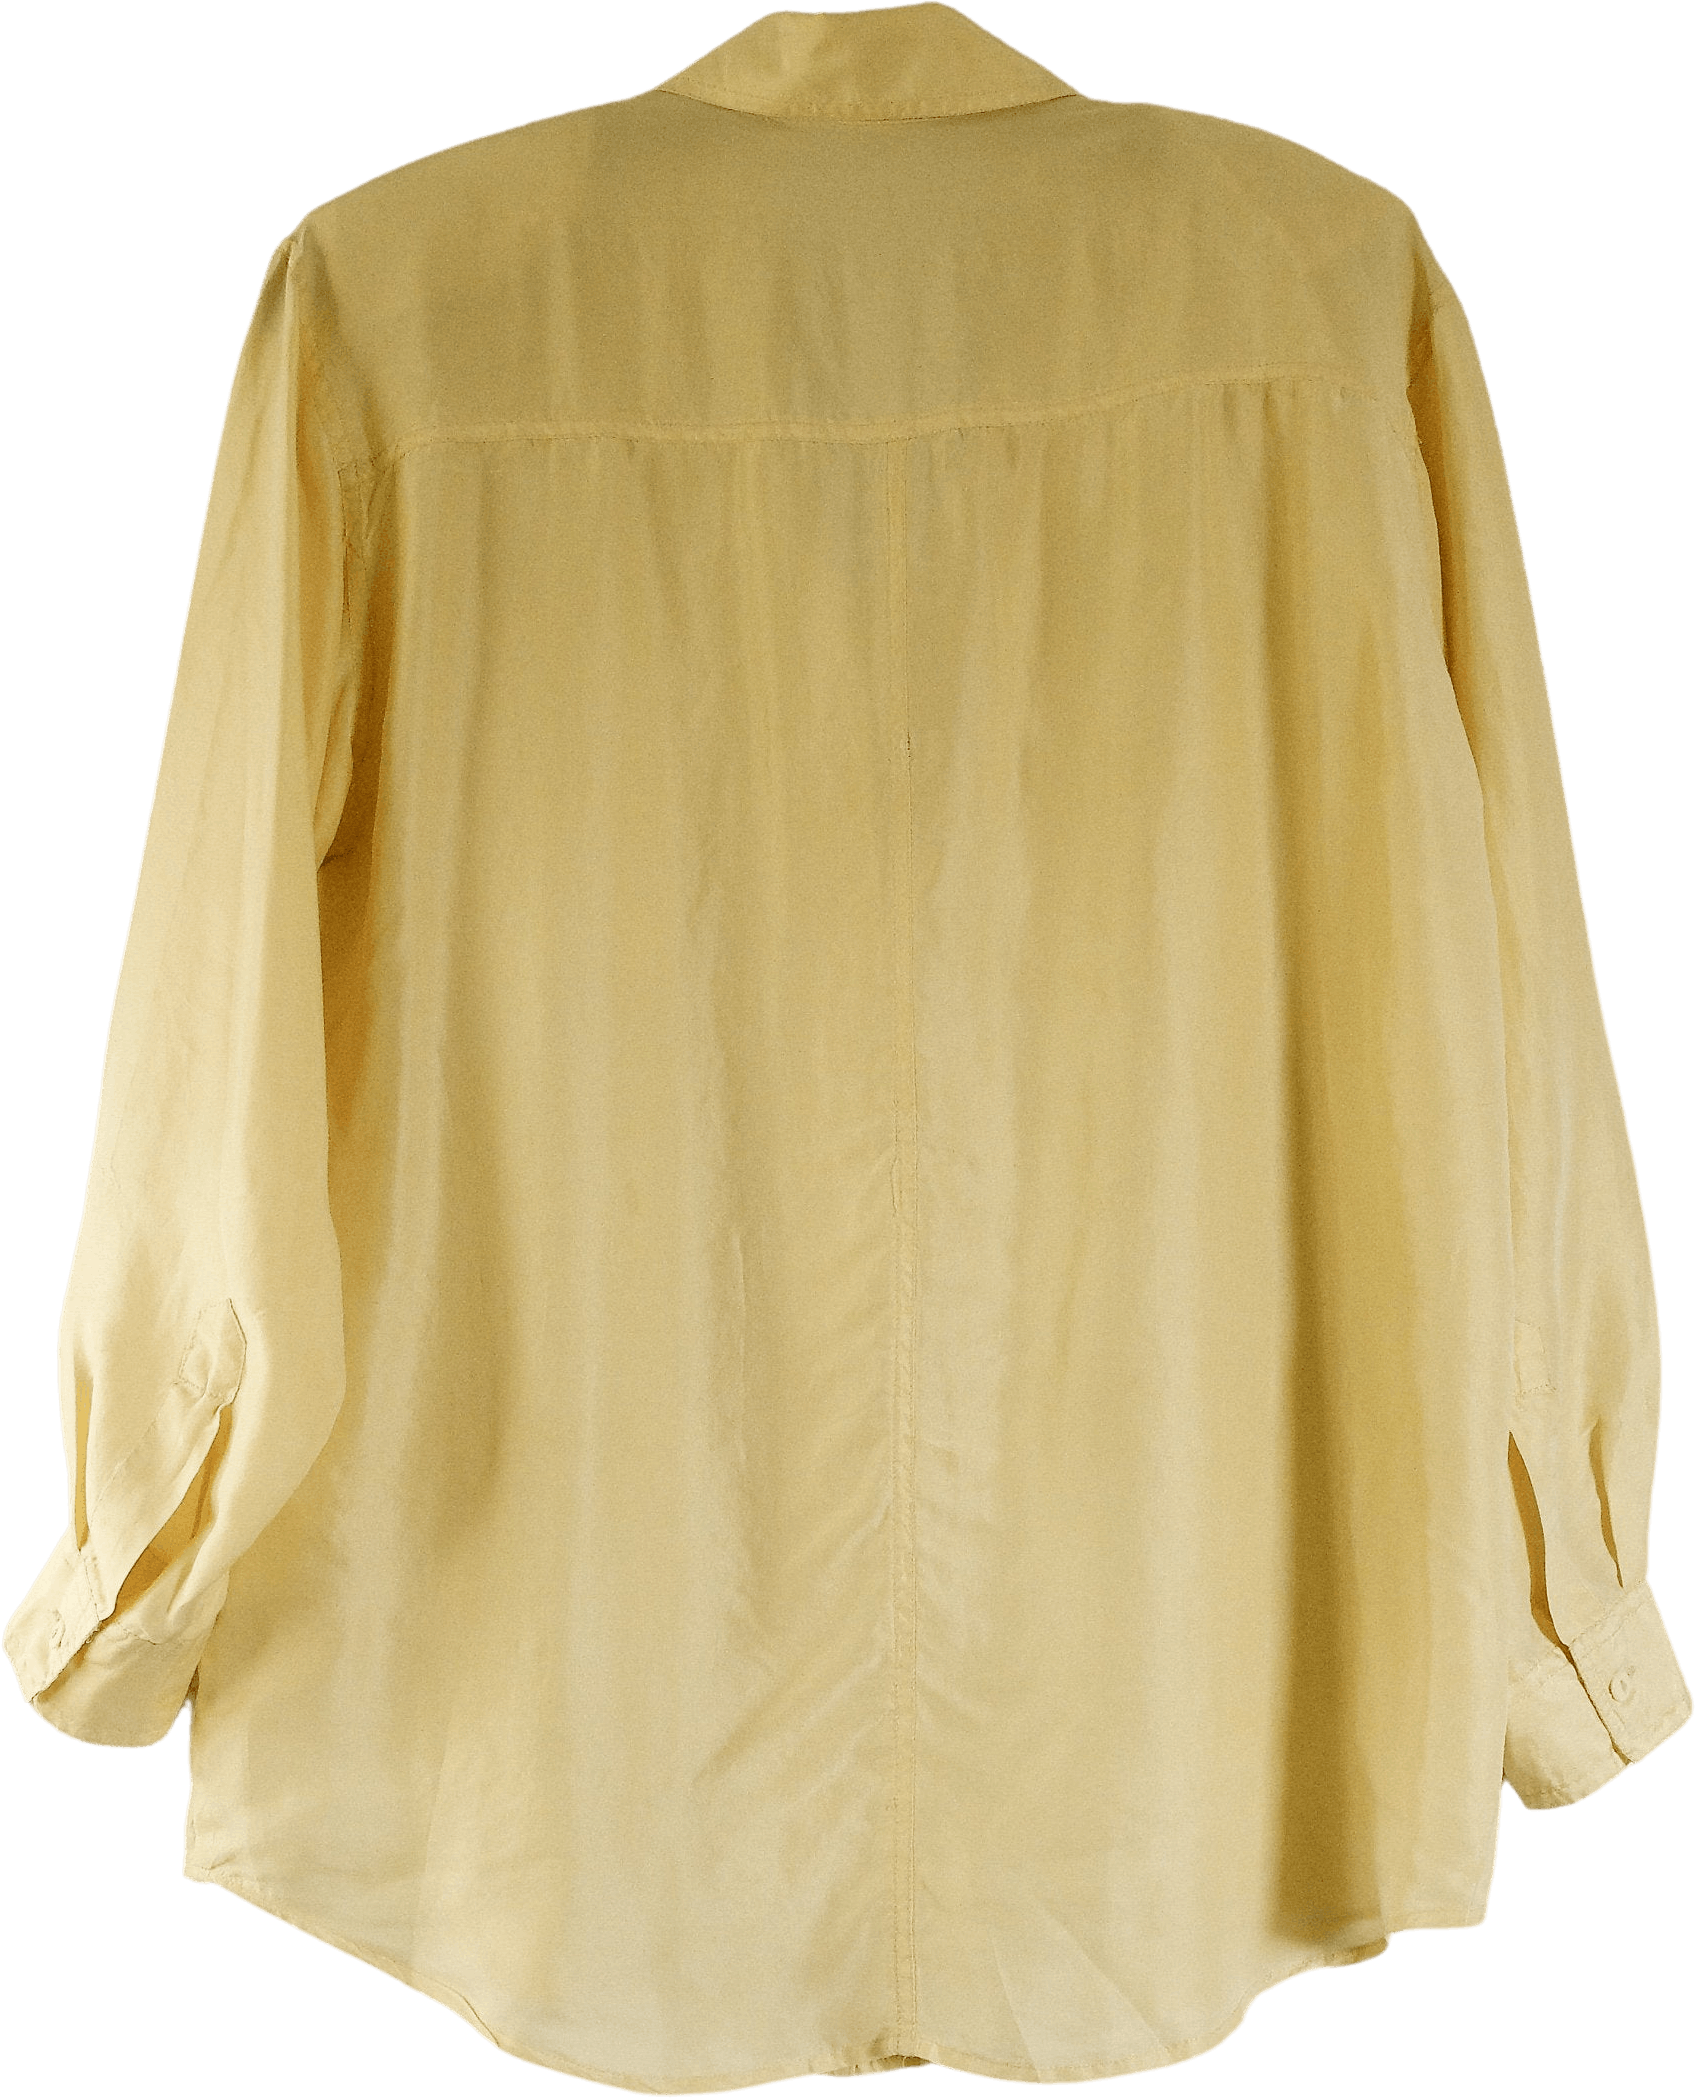 Vintage 80’s Yellow Silk Pocket Top Button Up Blouse | Shop THRILLING